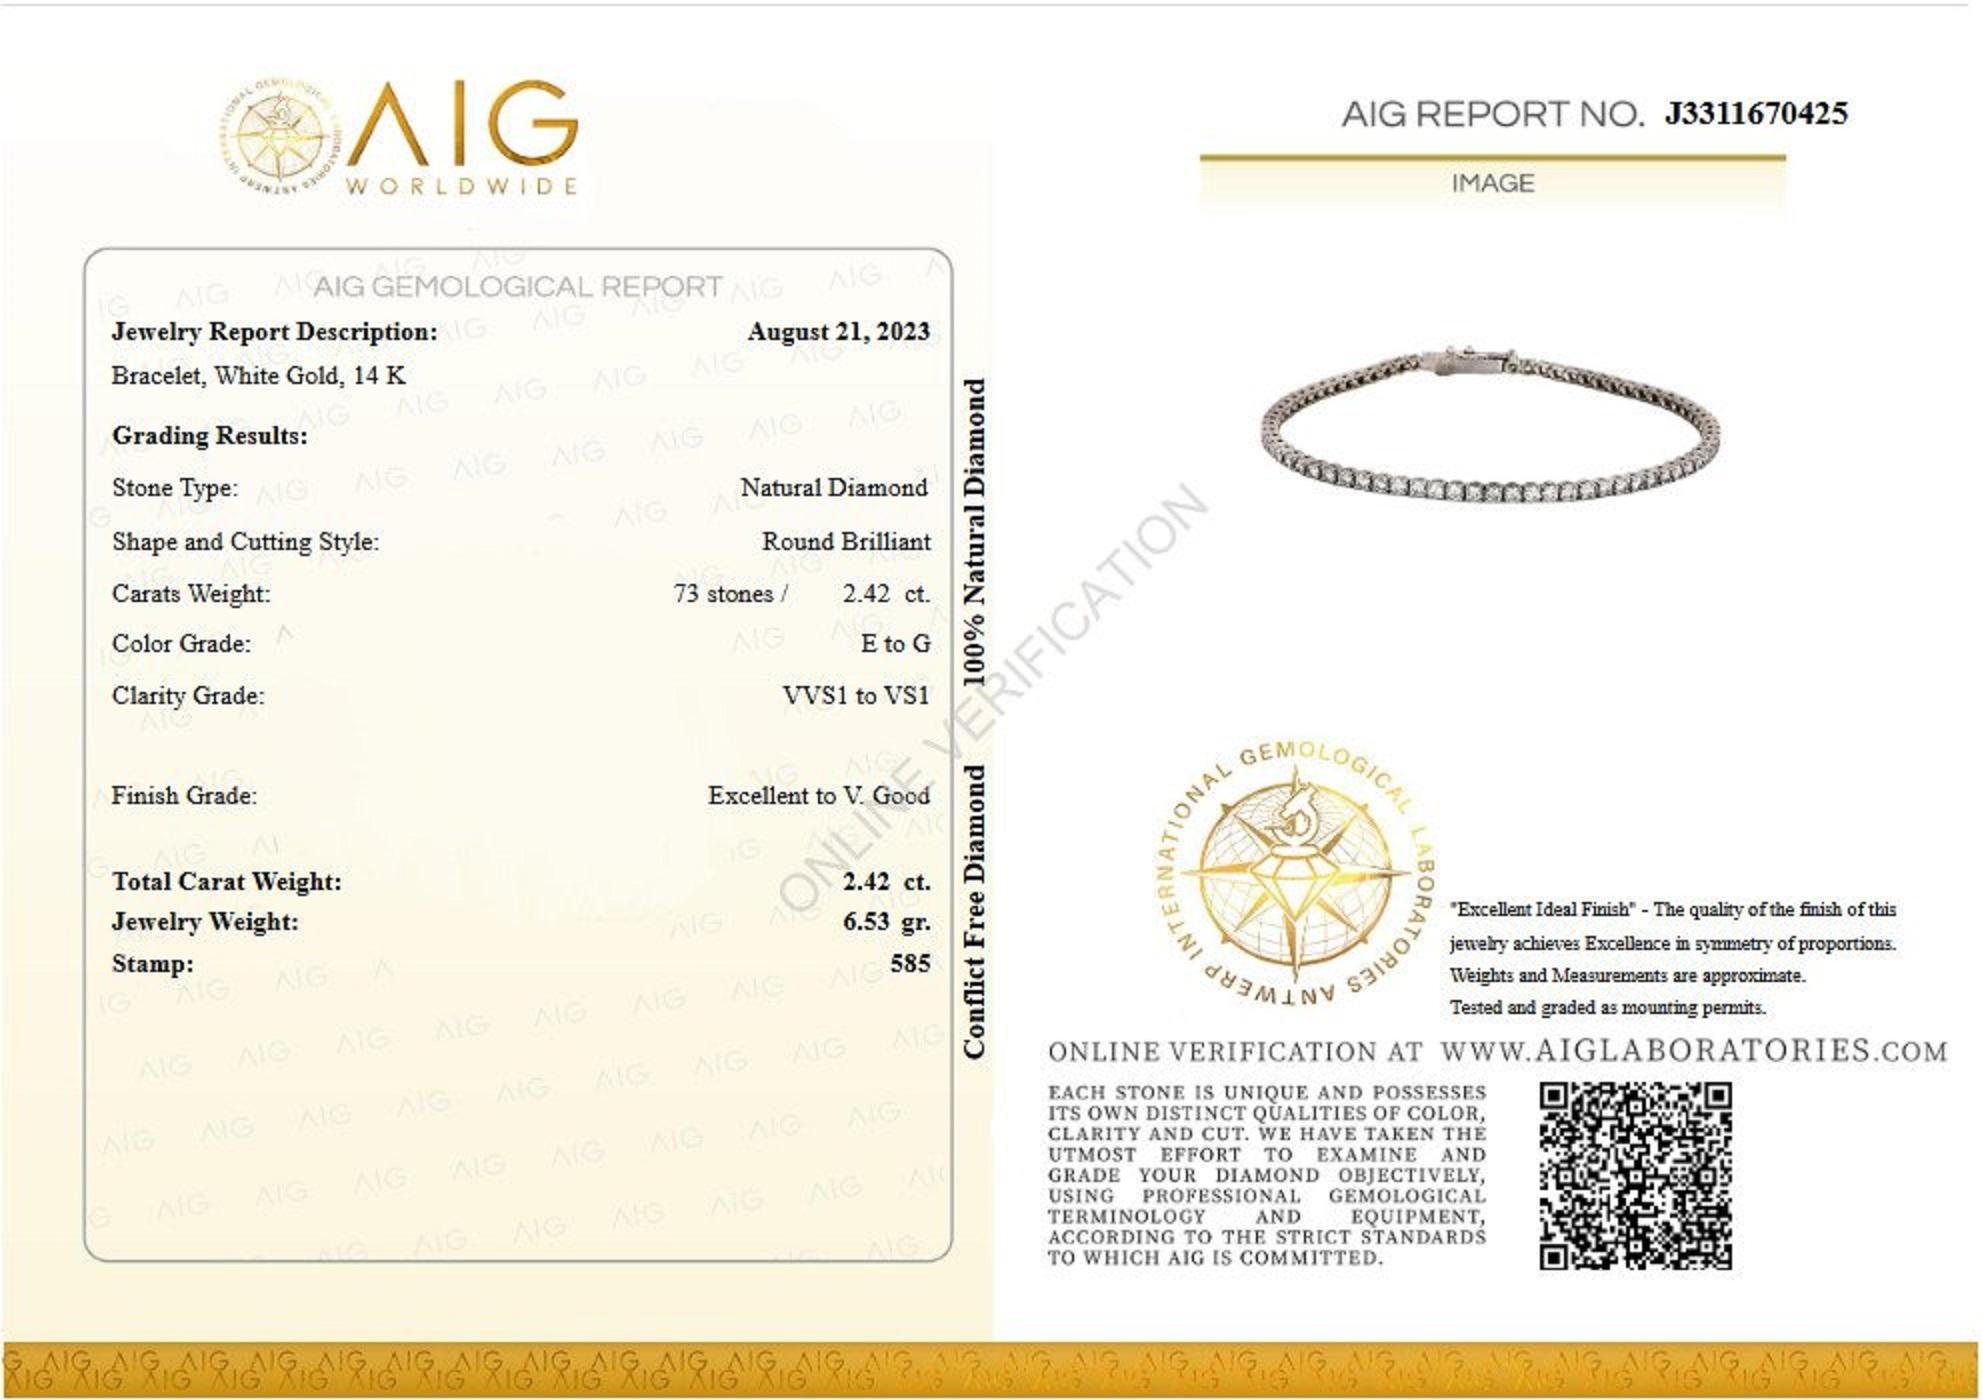 ___________
Natural Diamonds
Cut: Round Brilliant
Carat: 2.42 cttw / 73 stones
Color: E to G
Clarity: VVS1 to VS1

Item ships from Israeli Diamonds Exchange, customers are responsible for any local customs or VAT fees that might apply to the